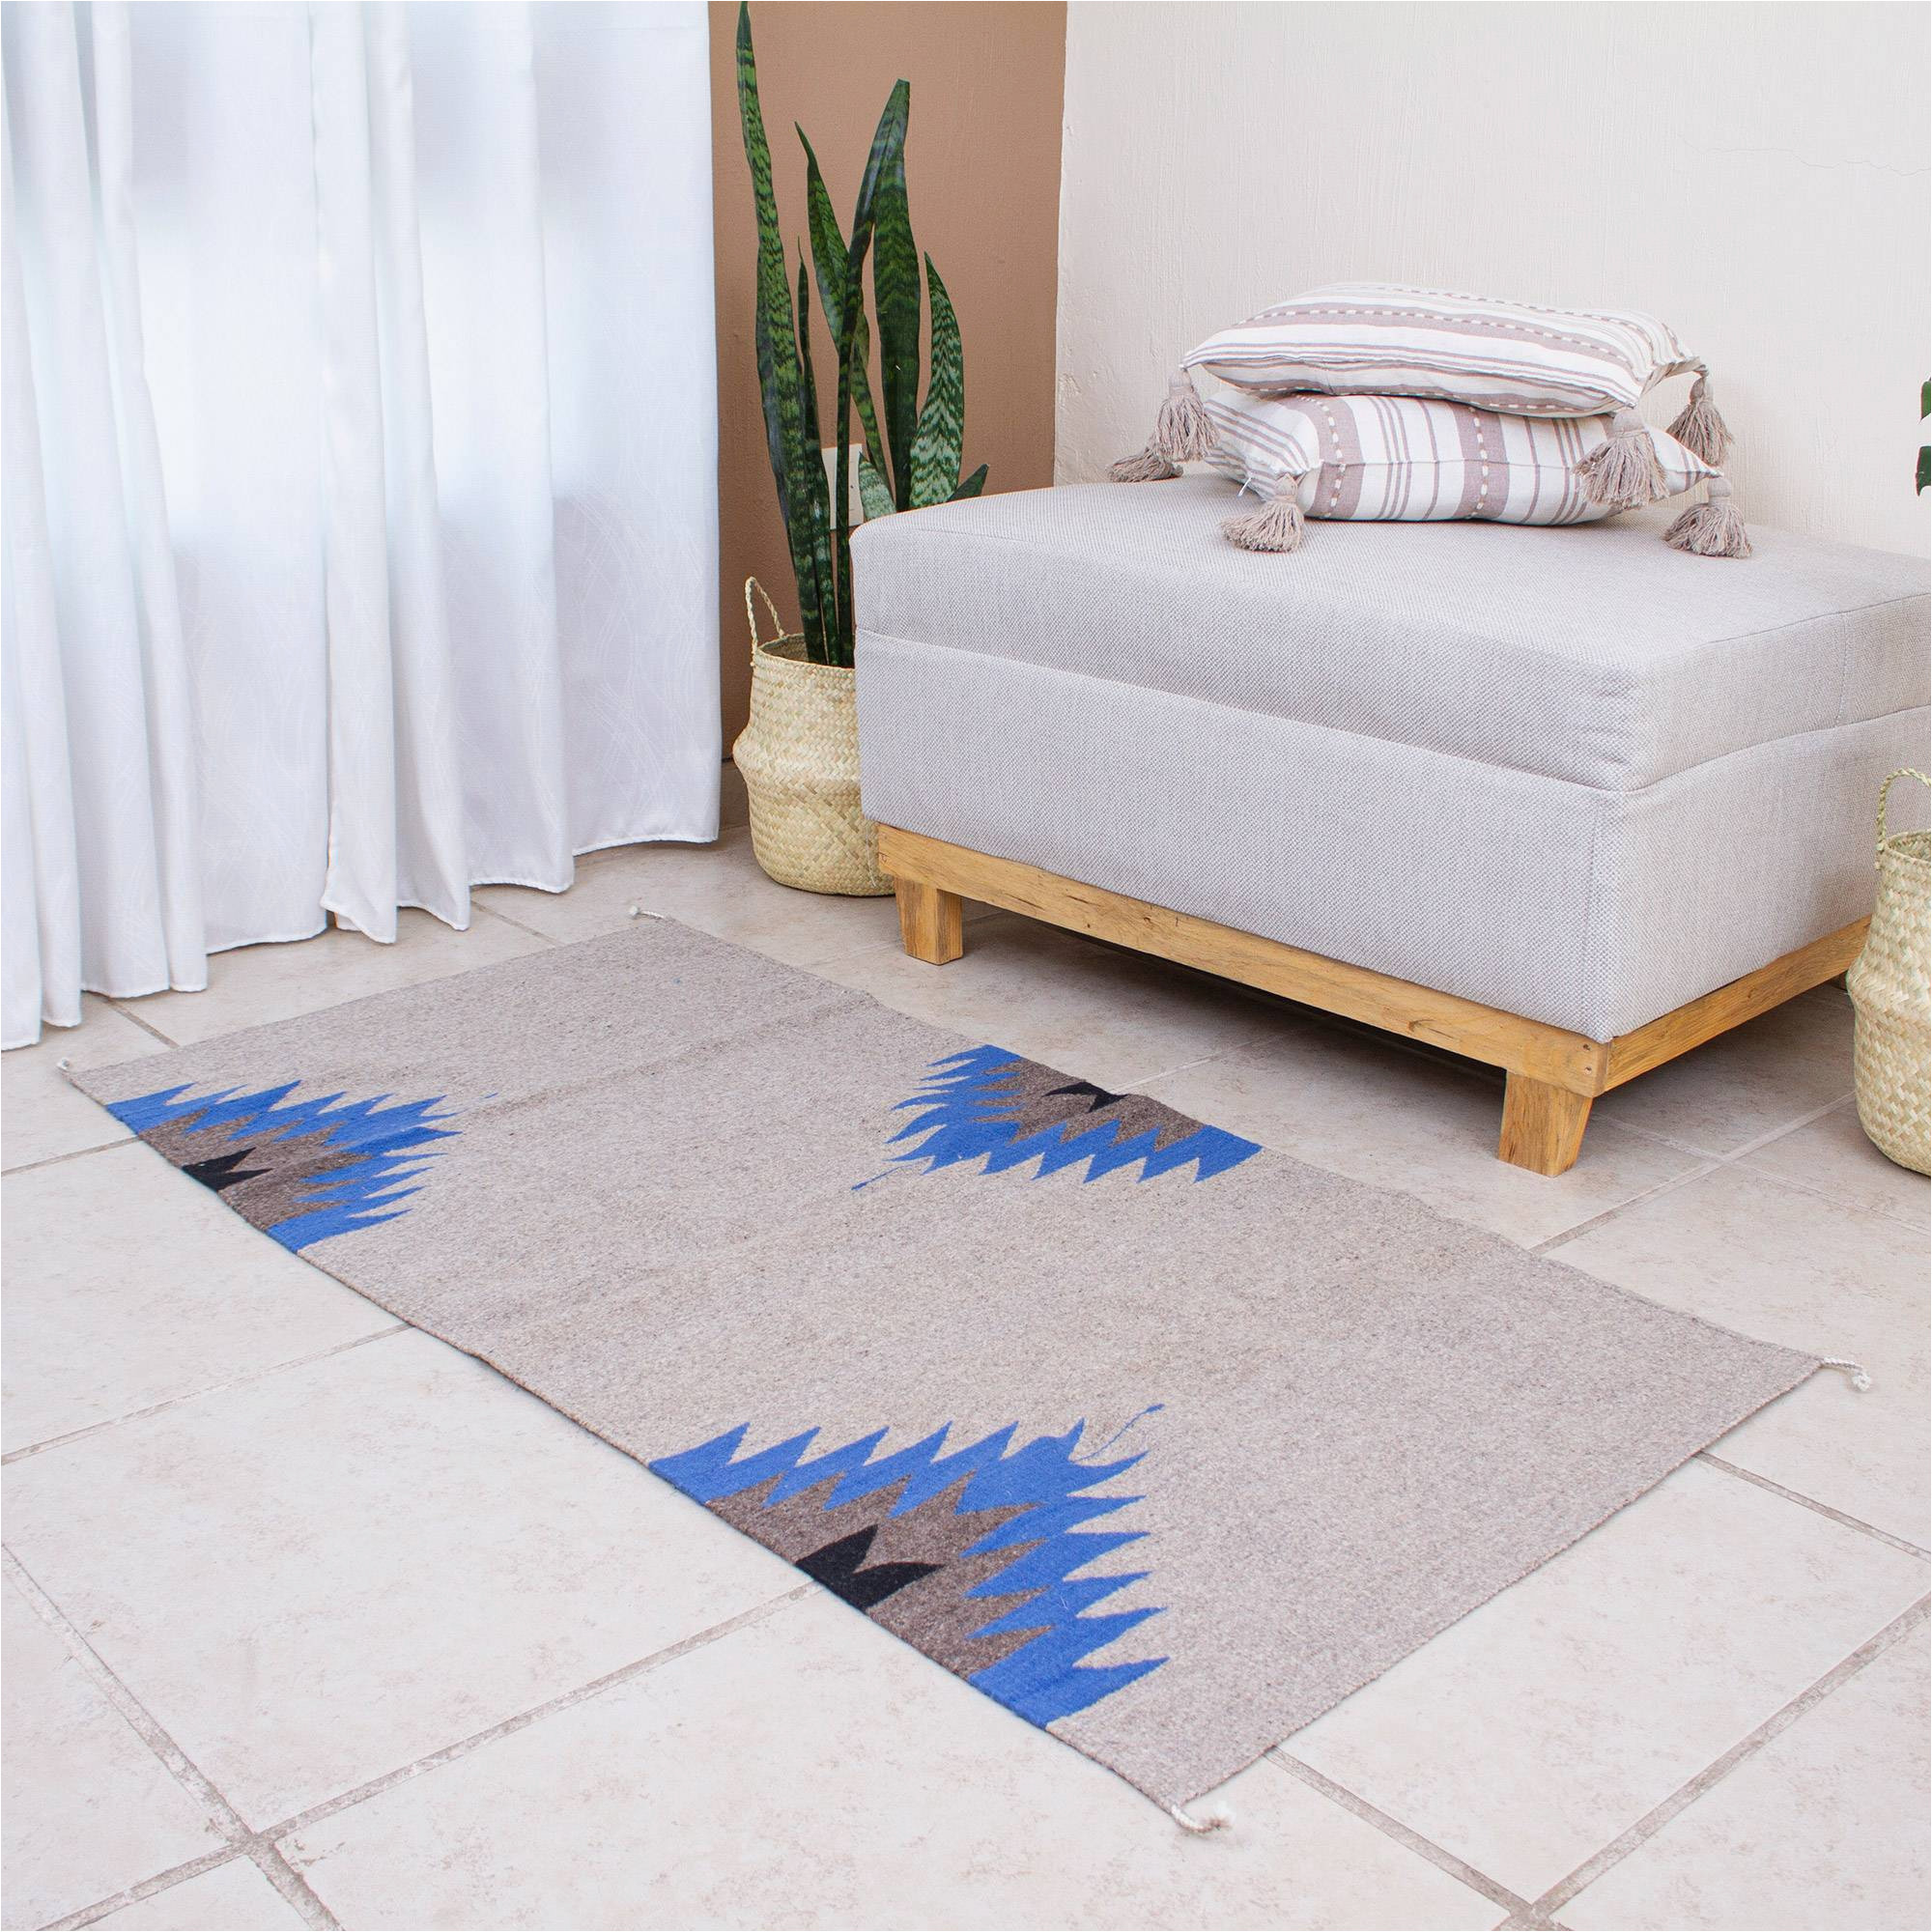 2.5 X 4 area Rug Geometric Pattern Handwoven Wool area Rug (2.5×4.5), ‘between the Mountains’